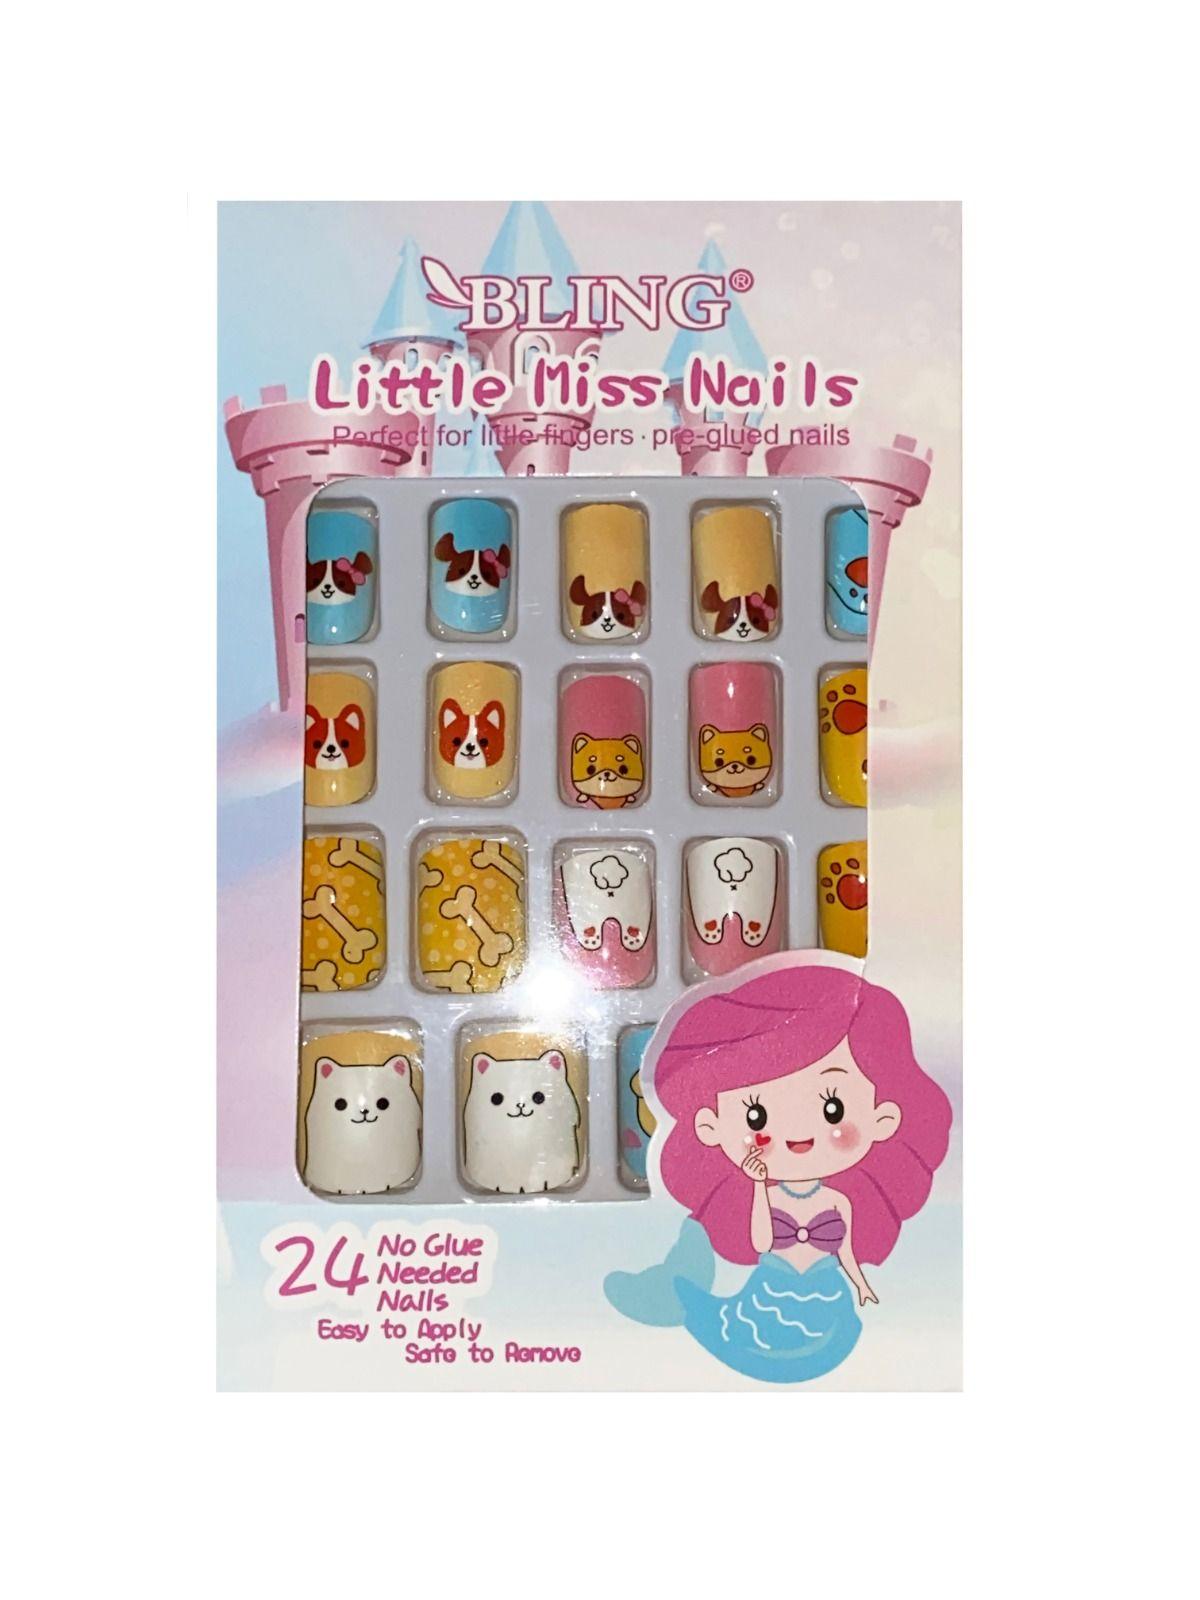 Artificial nails for children, 24 pcs - type II